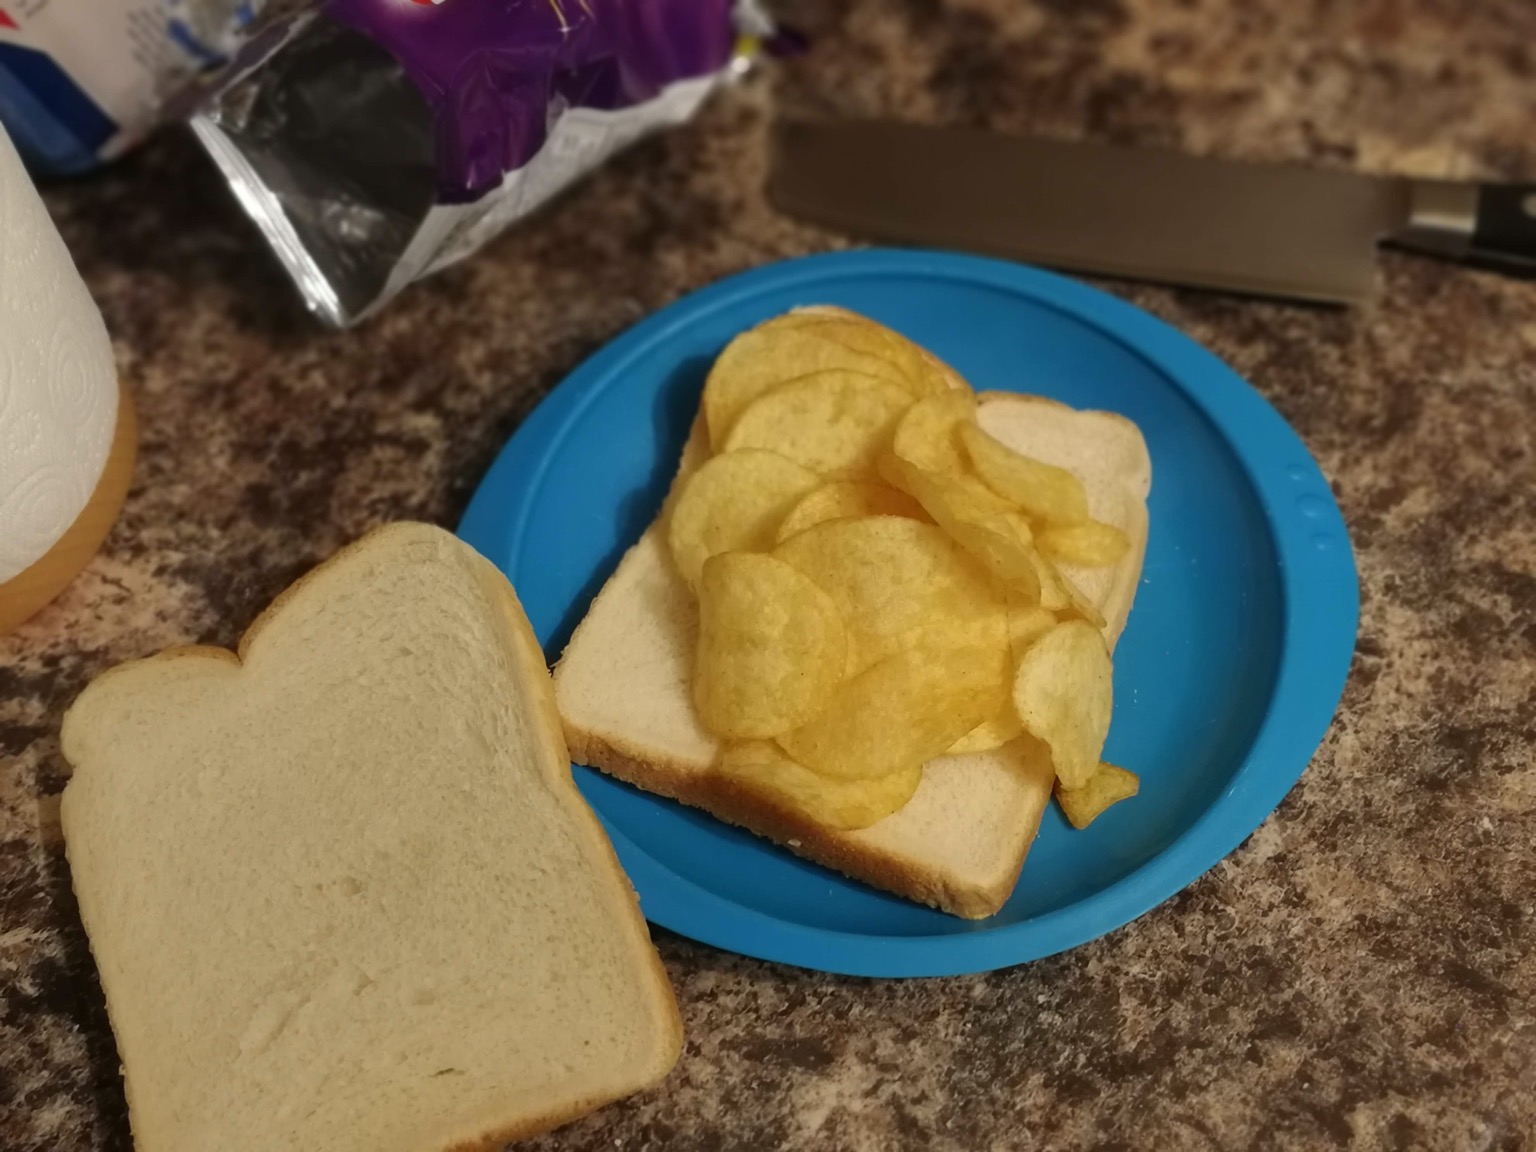 White crisp sandwich on a plastic plate with lid off